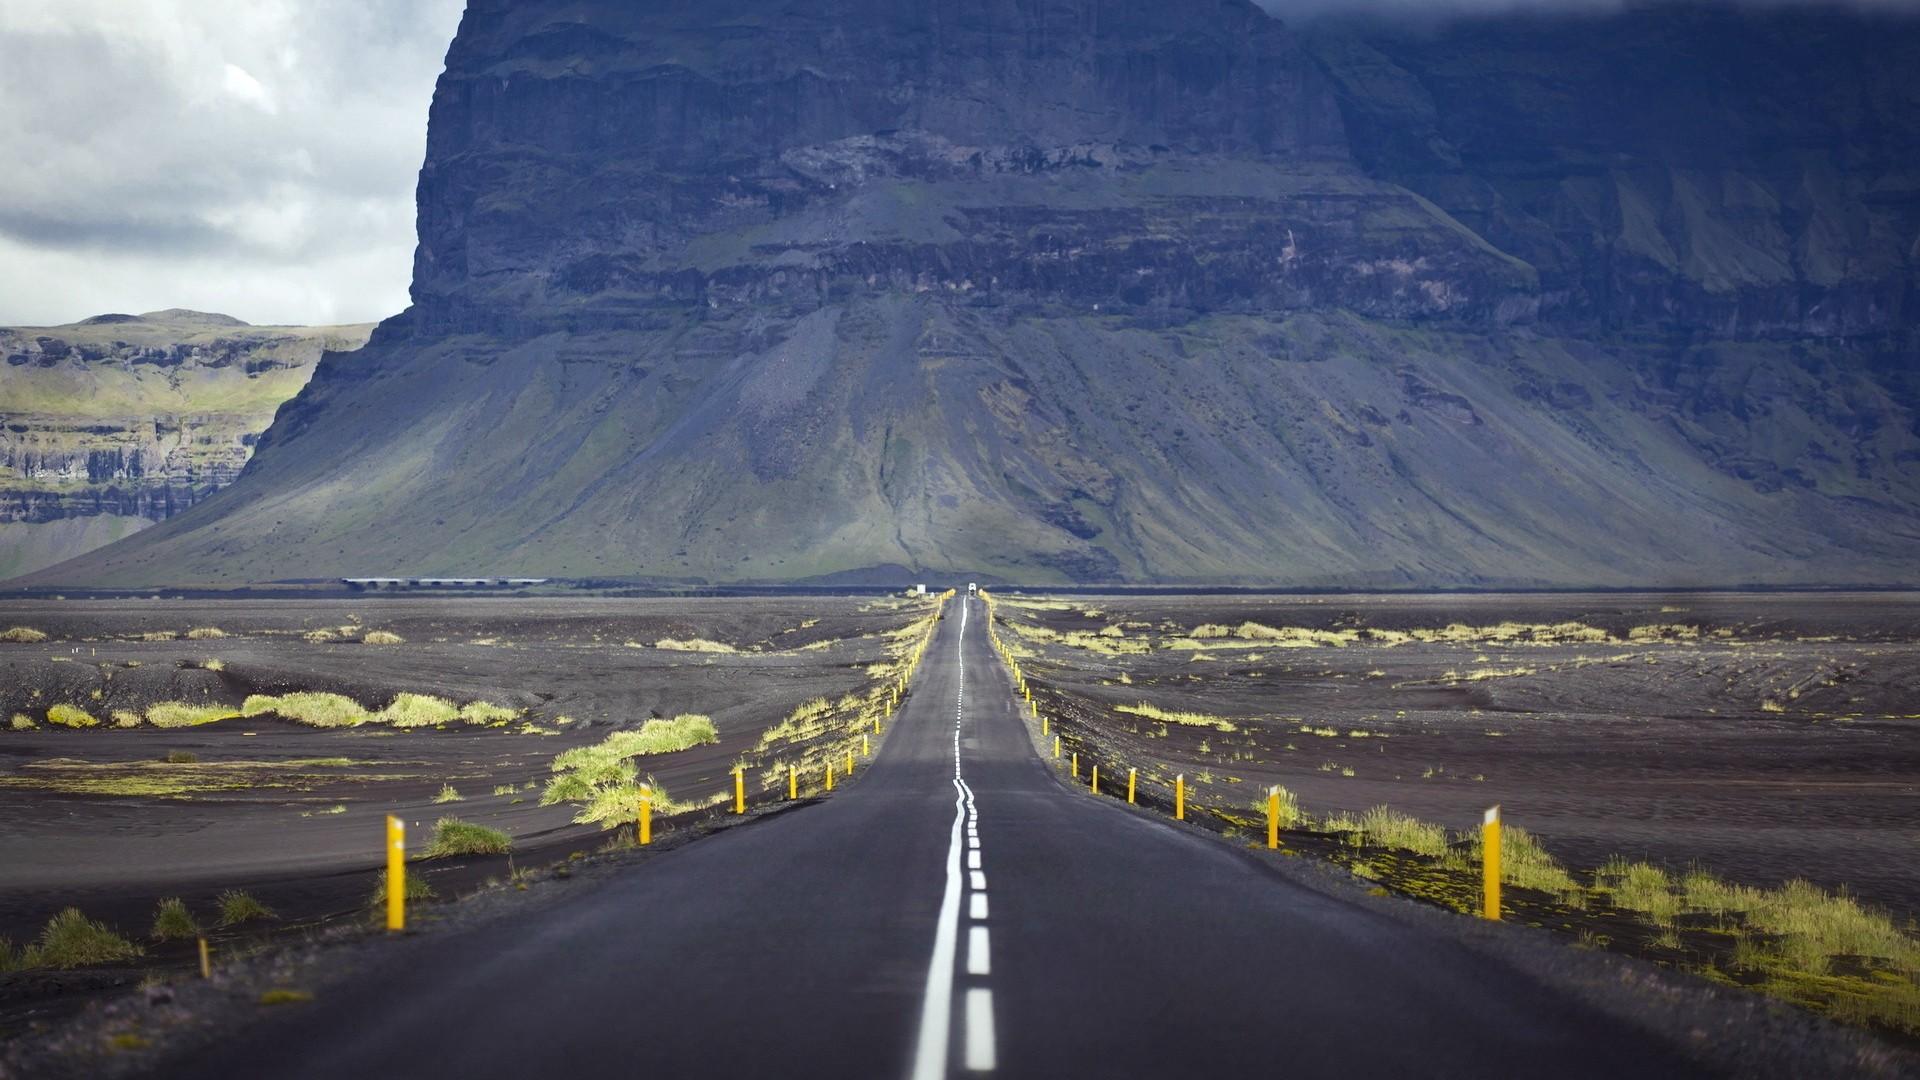 Iceland Wallpaper Road Beautiful Place